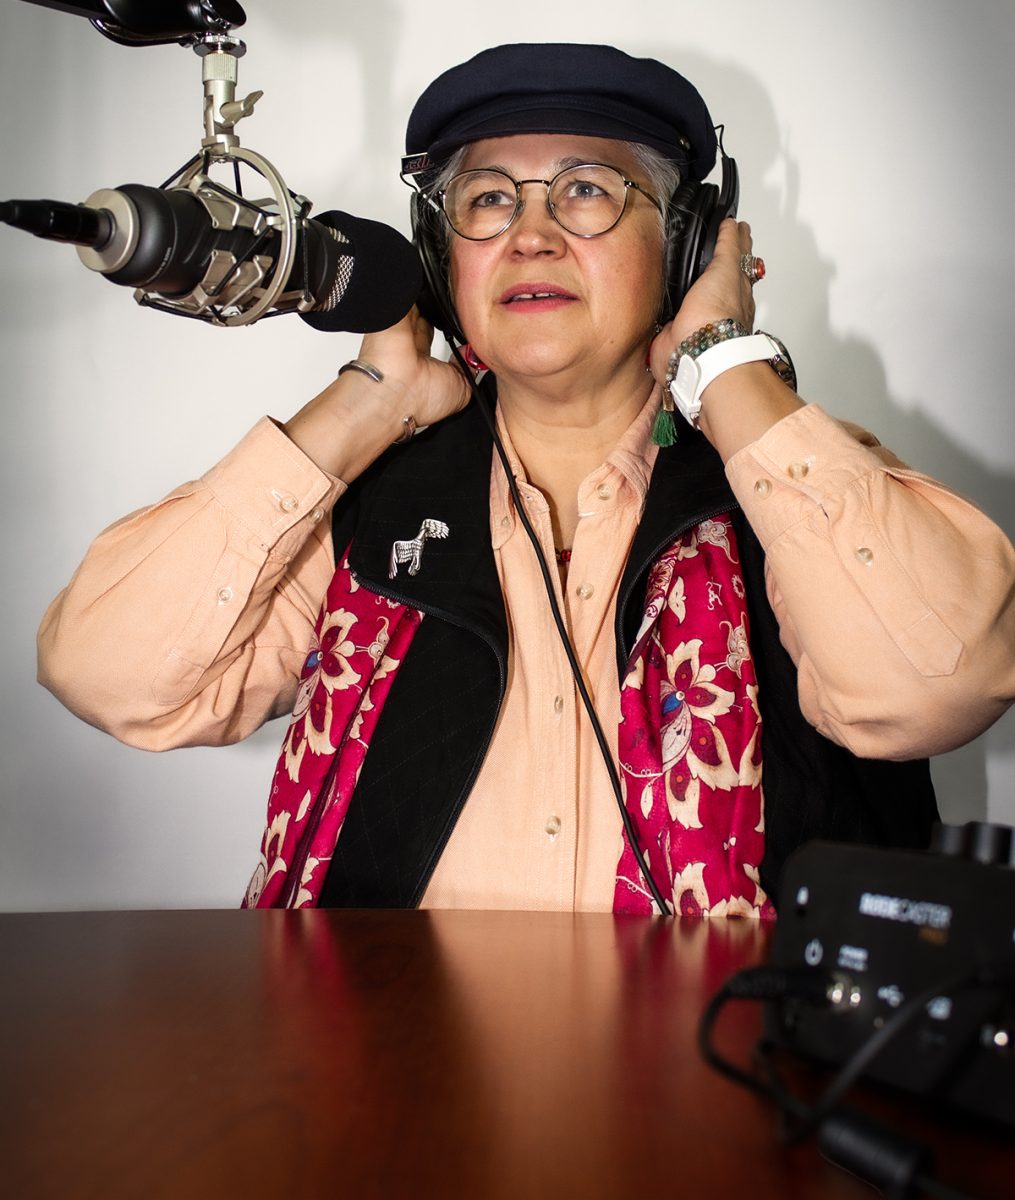 UTEP English professor and host of “El Paso Food Voices” (EPFV), Meredith Abarca, Ph.D. created a series of articles and podcasts that share El Paso’s story through food.